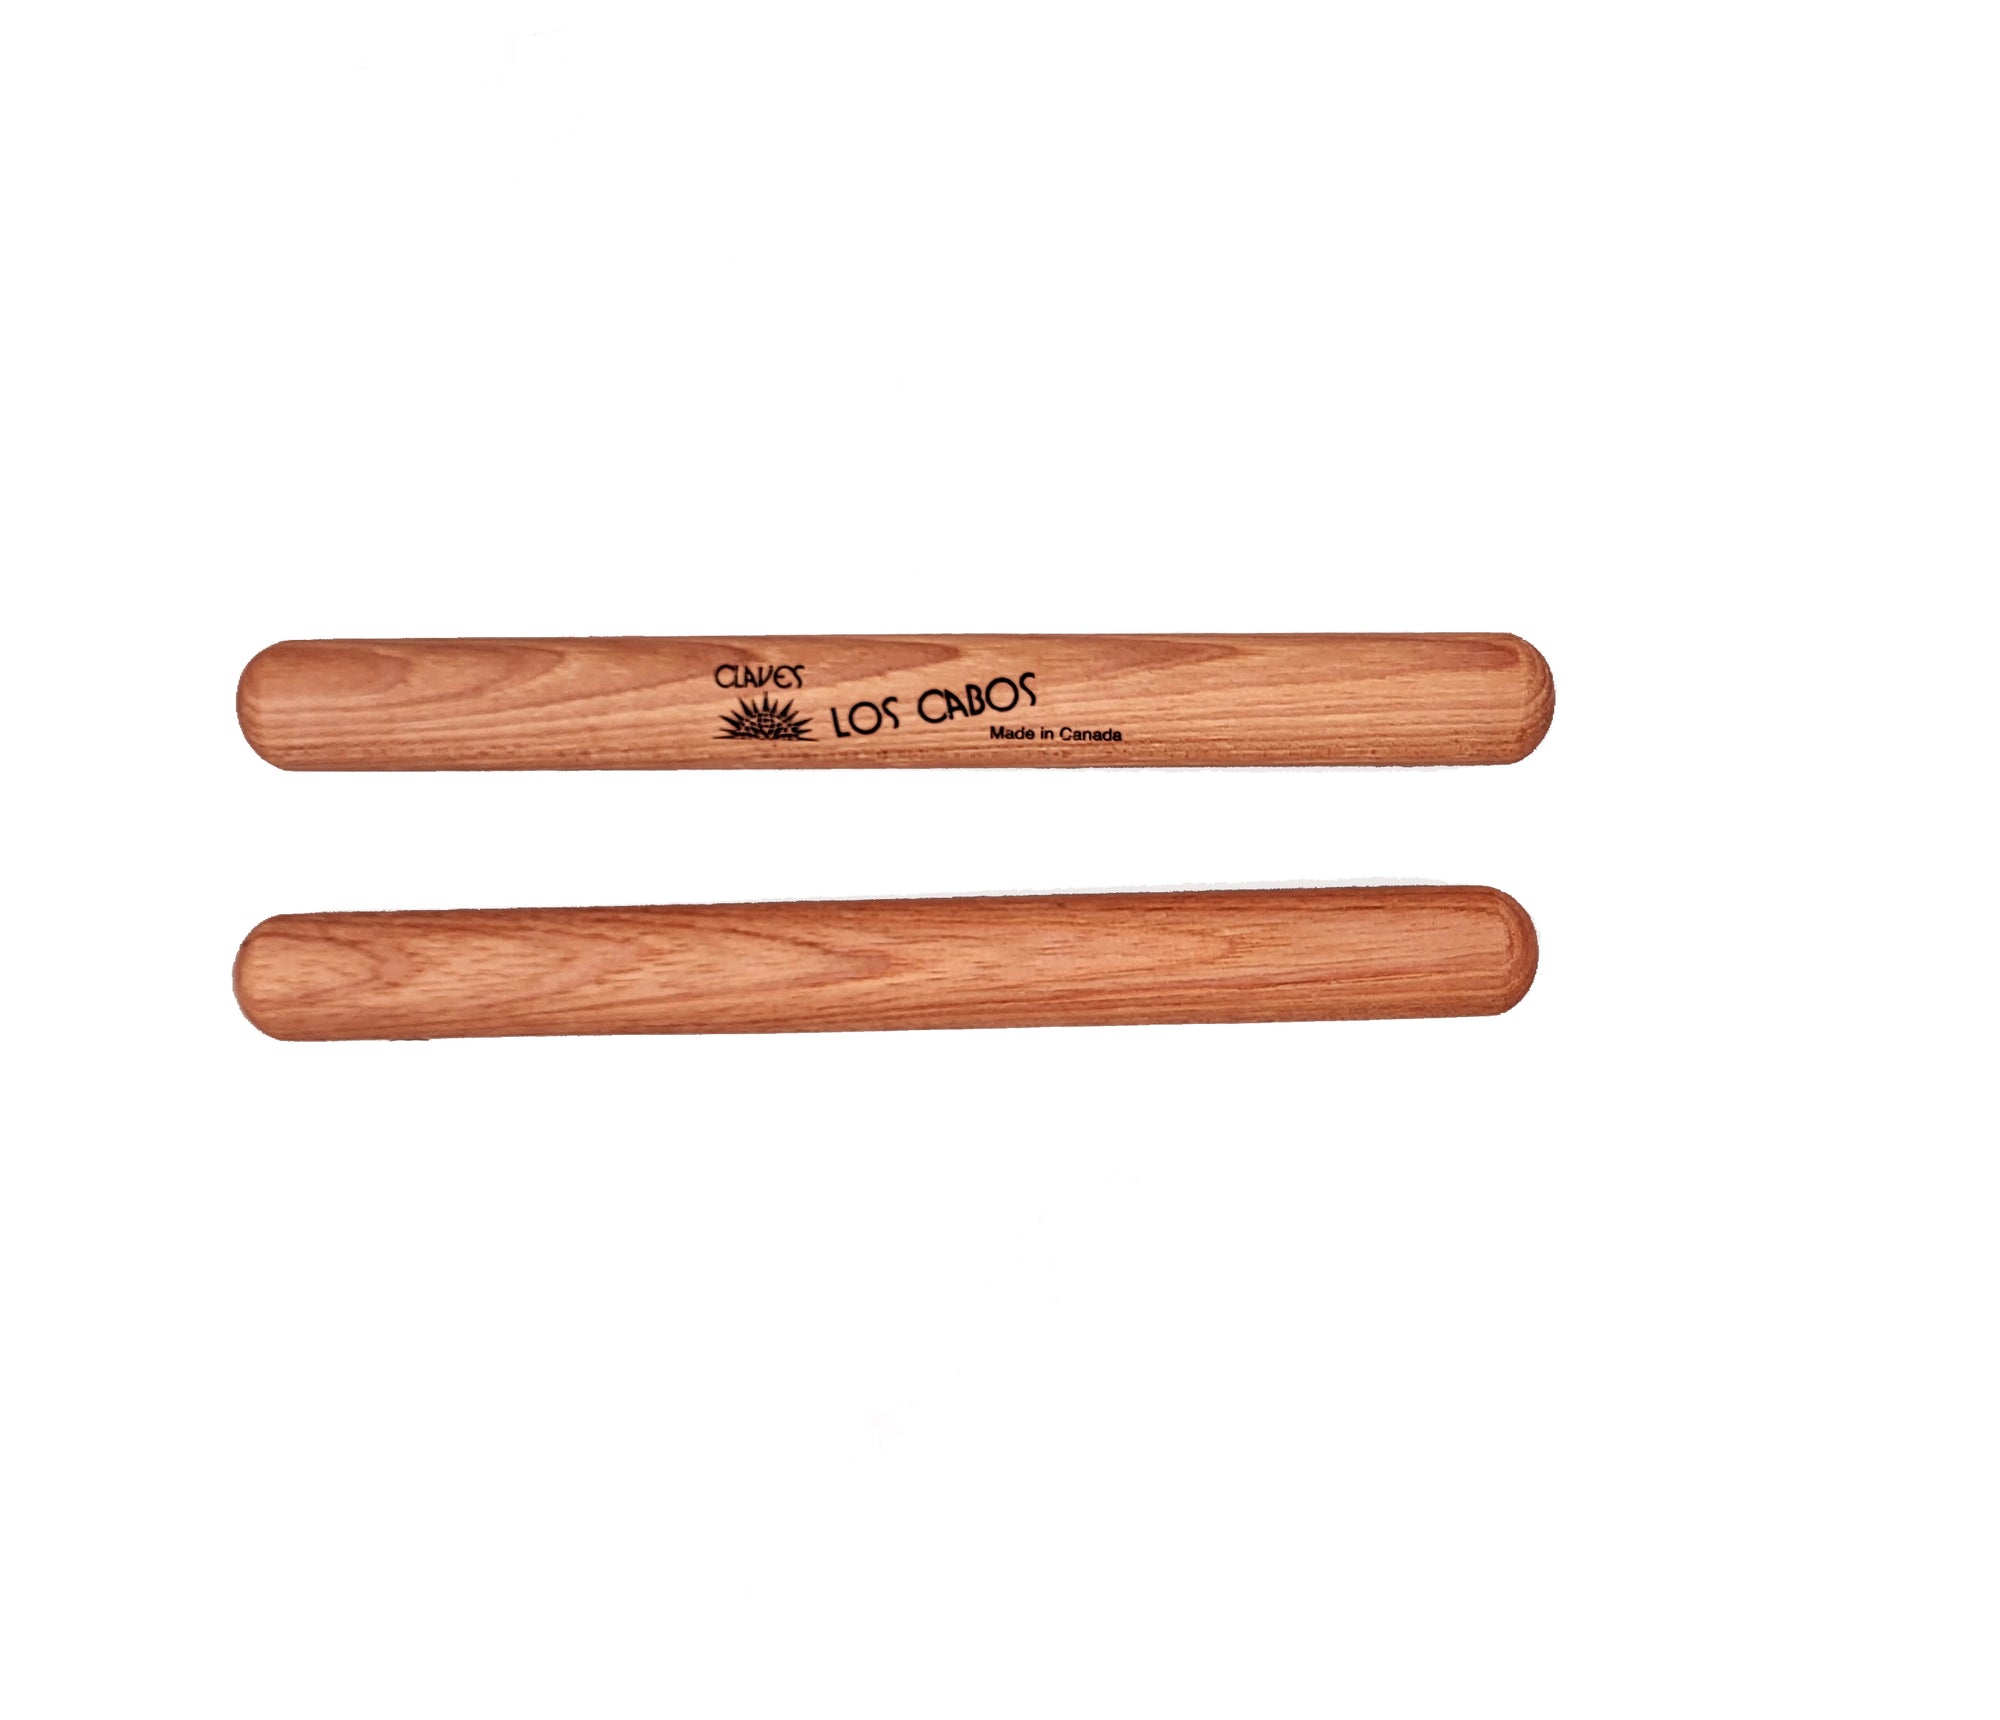 Los Cabos Red Hickory Claves